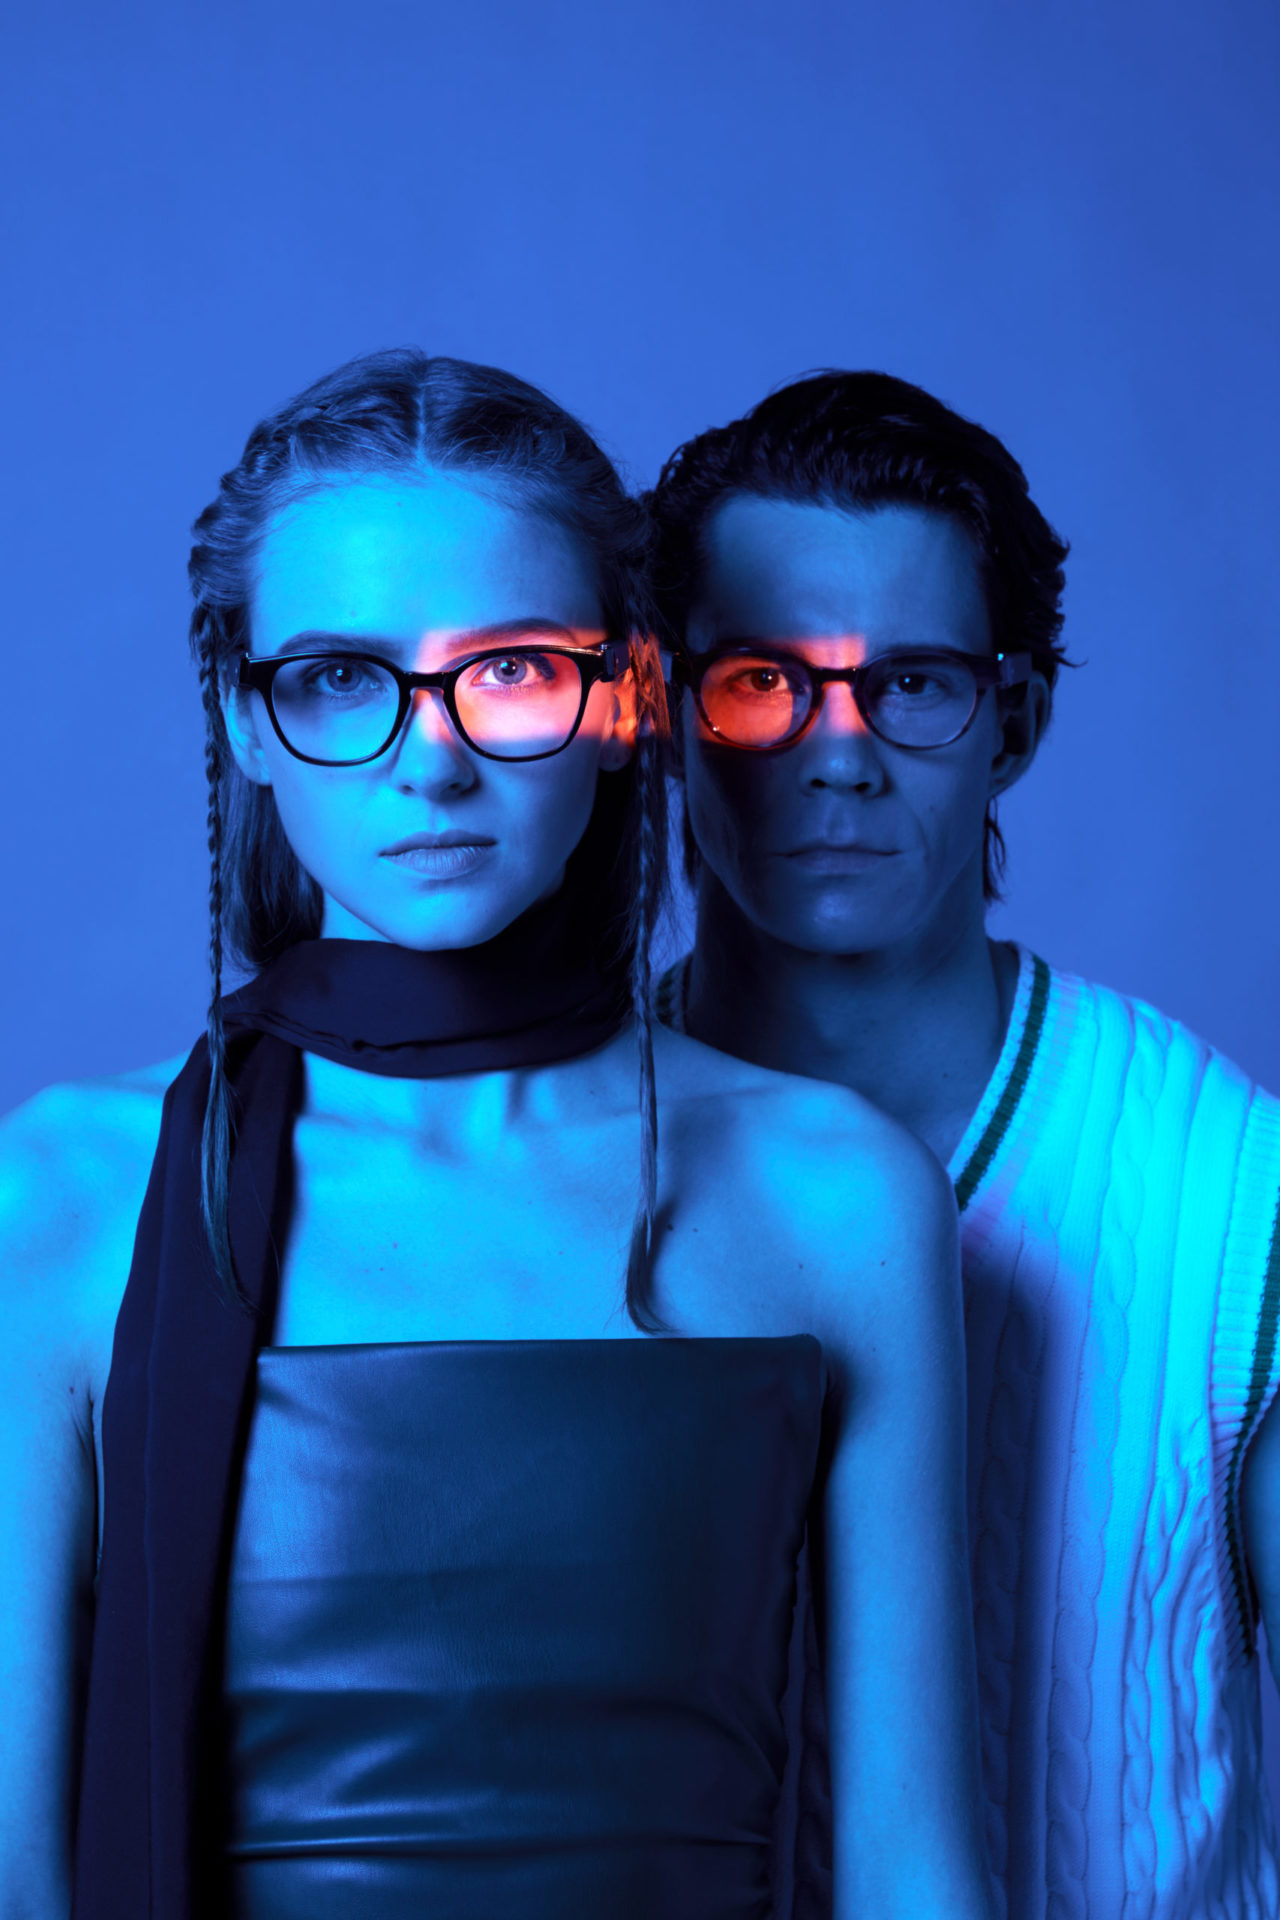 A man and a woman wearing eyeglasses. The background features a blue background with a neon red lighting effecton their eyeglasses. This creative promotional shoot was captured by I Heart Studios.